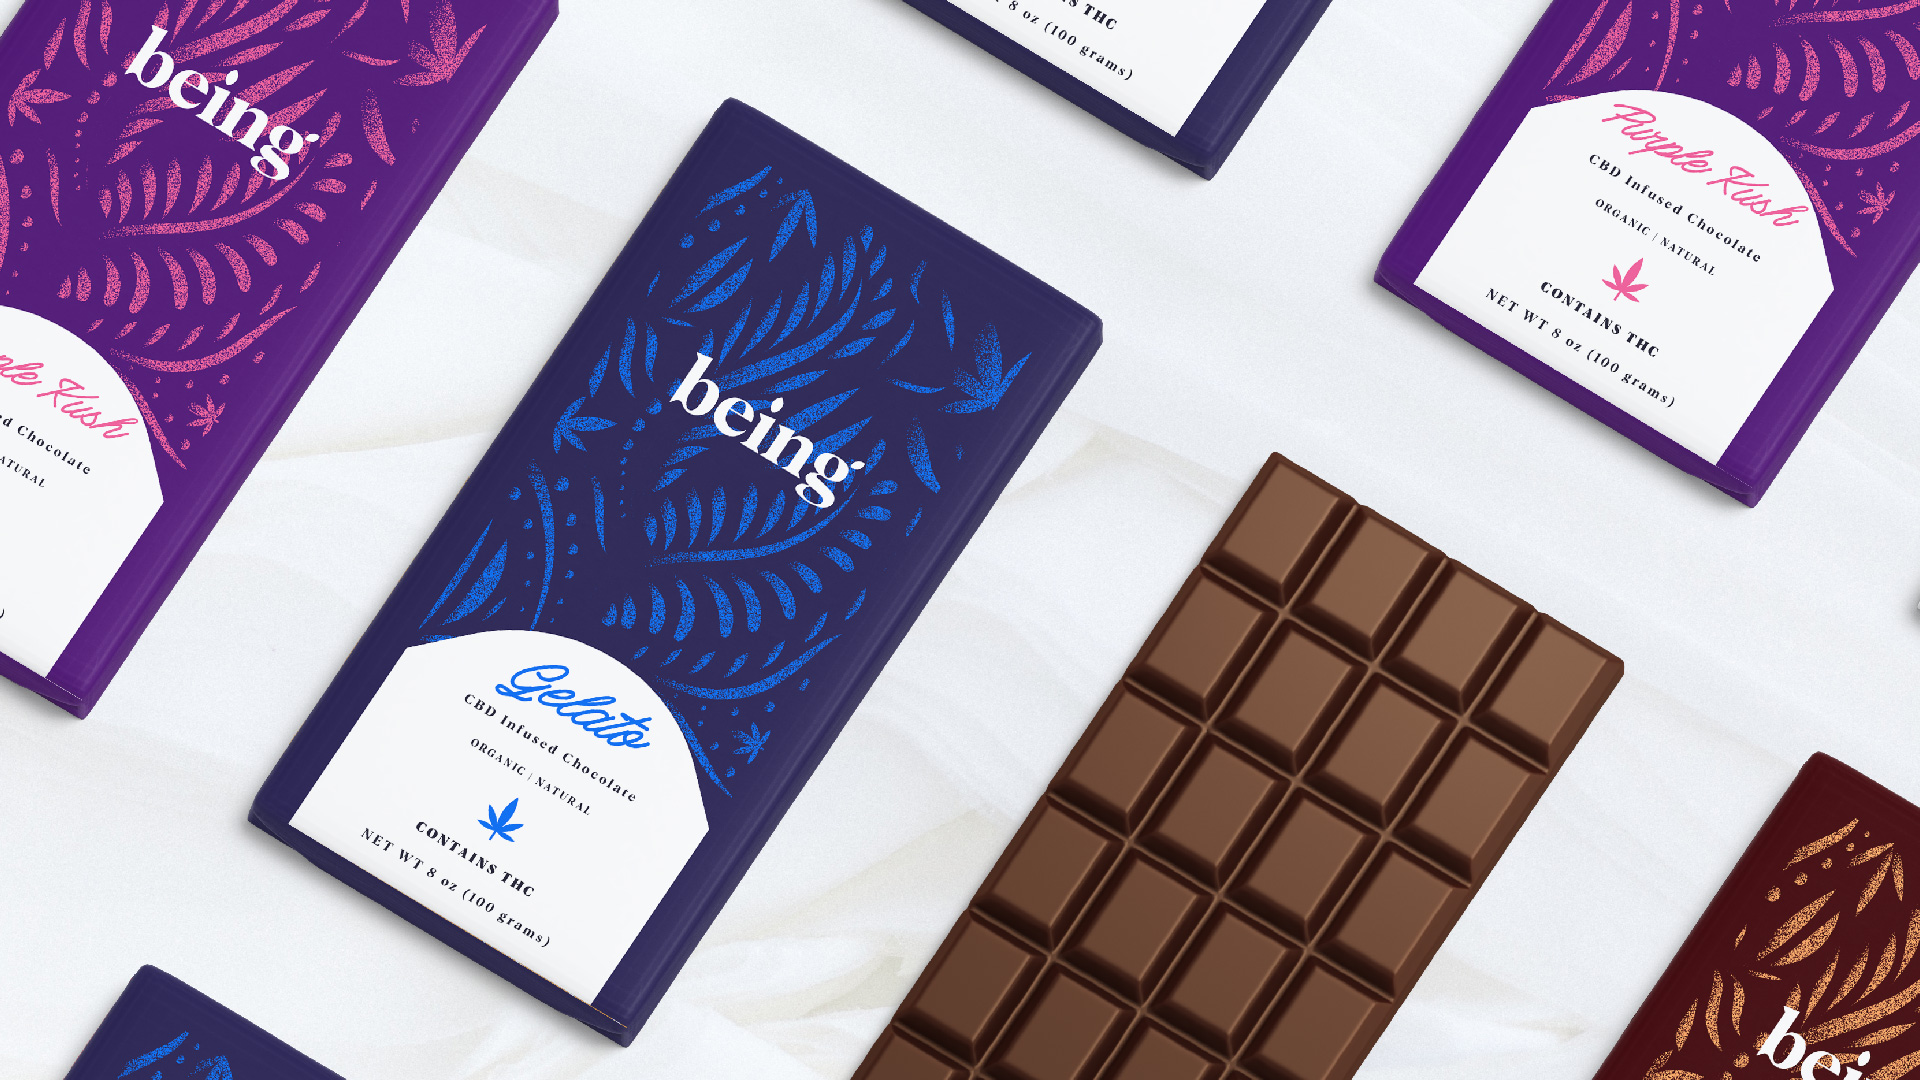 Being – CBD Infused Chocolates Packaging Design